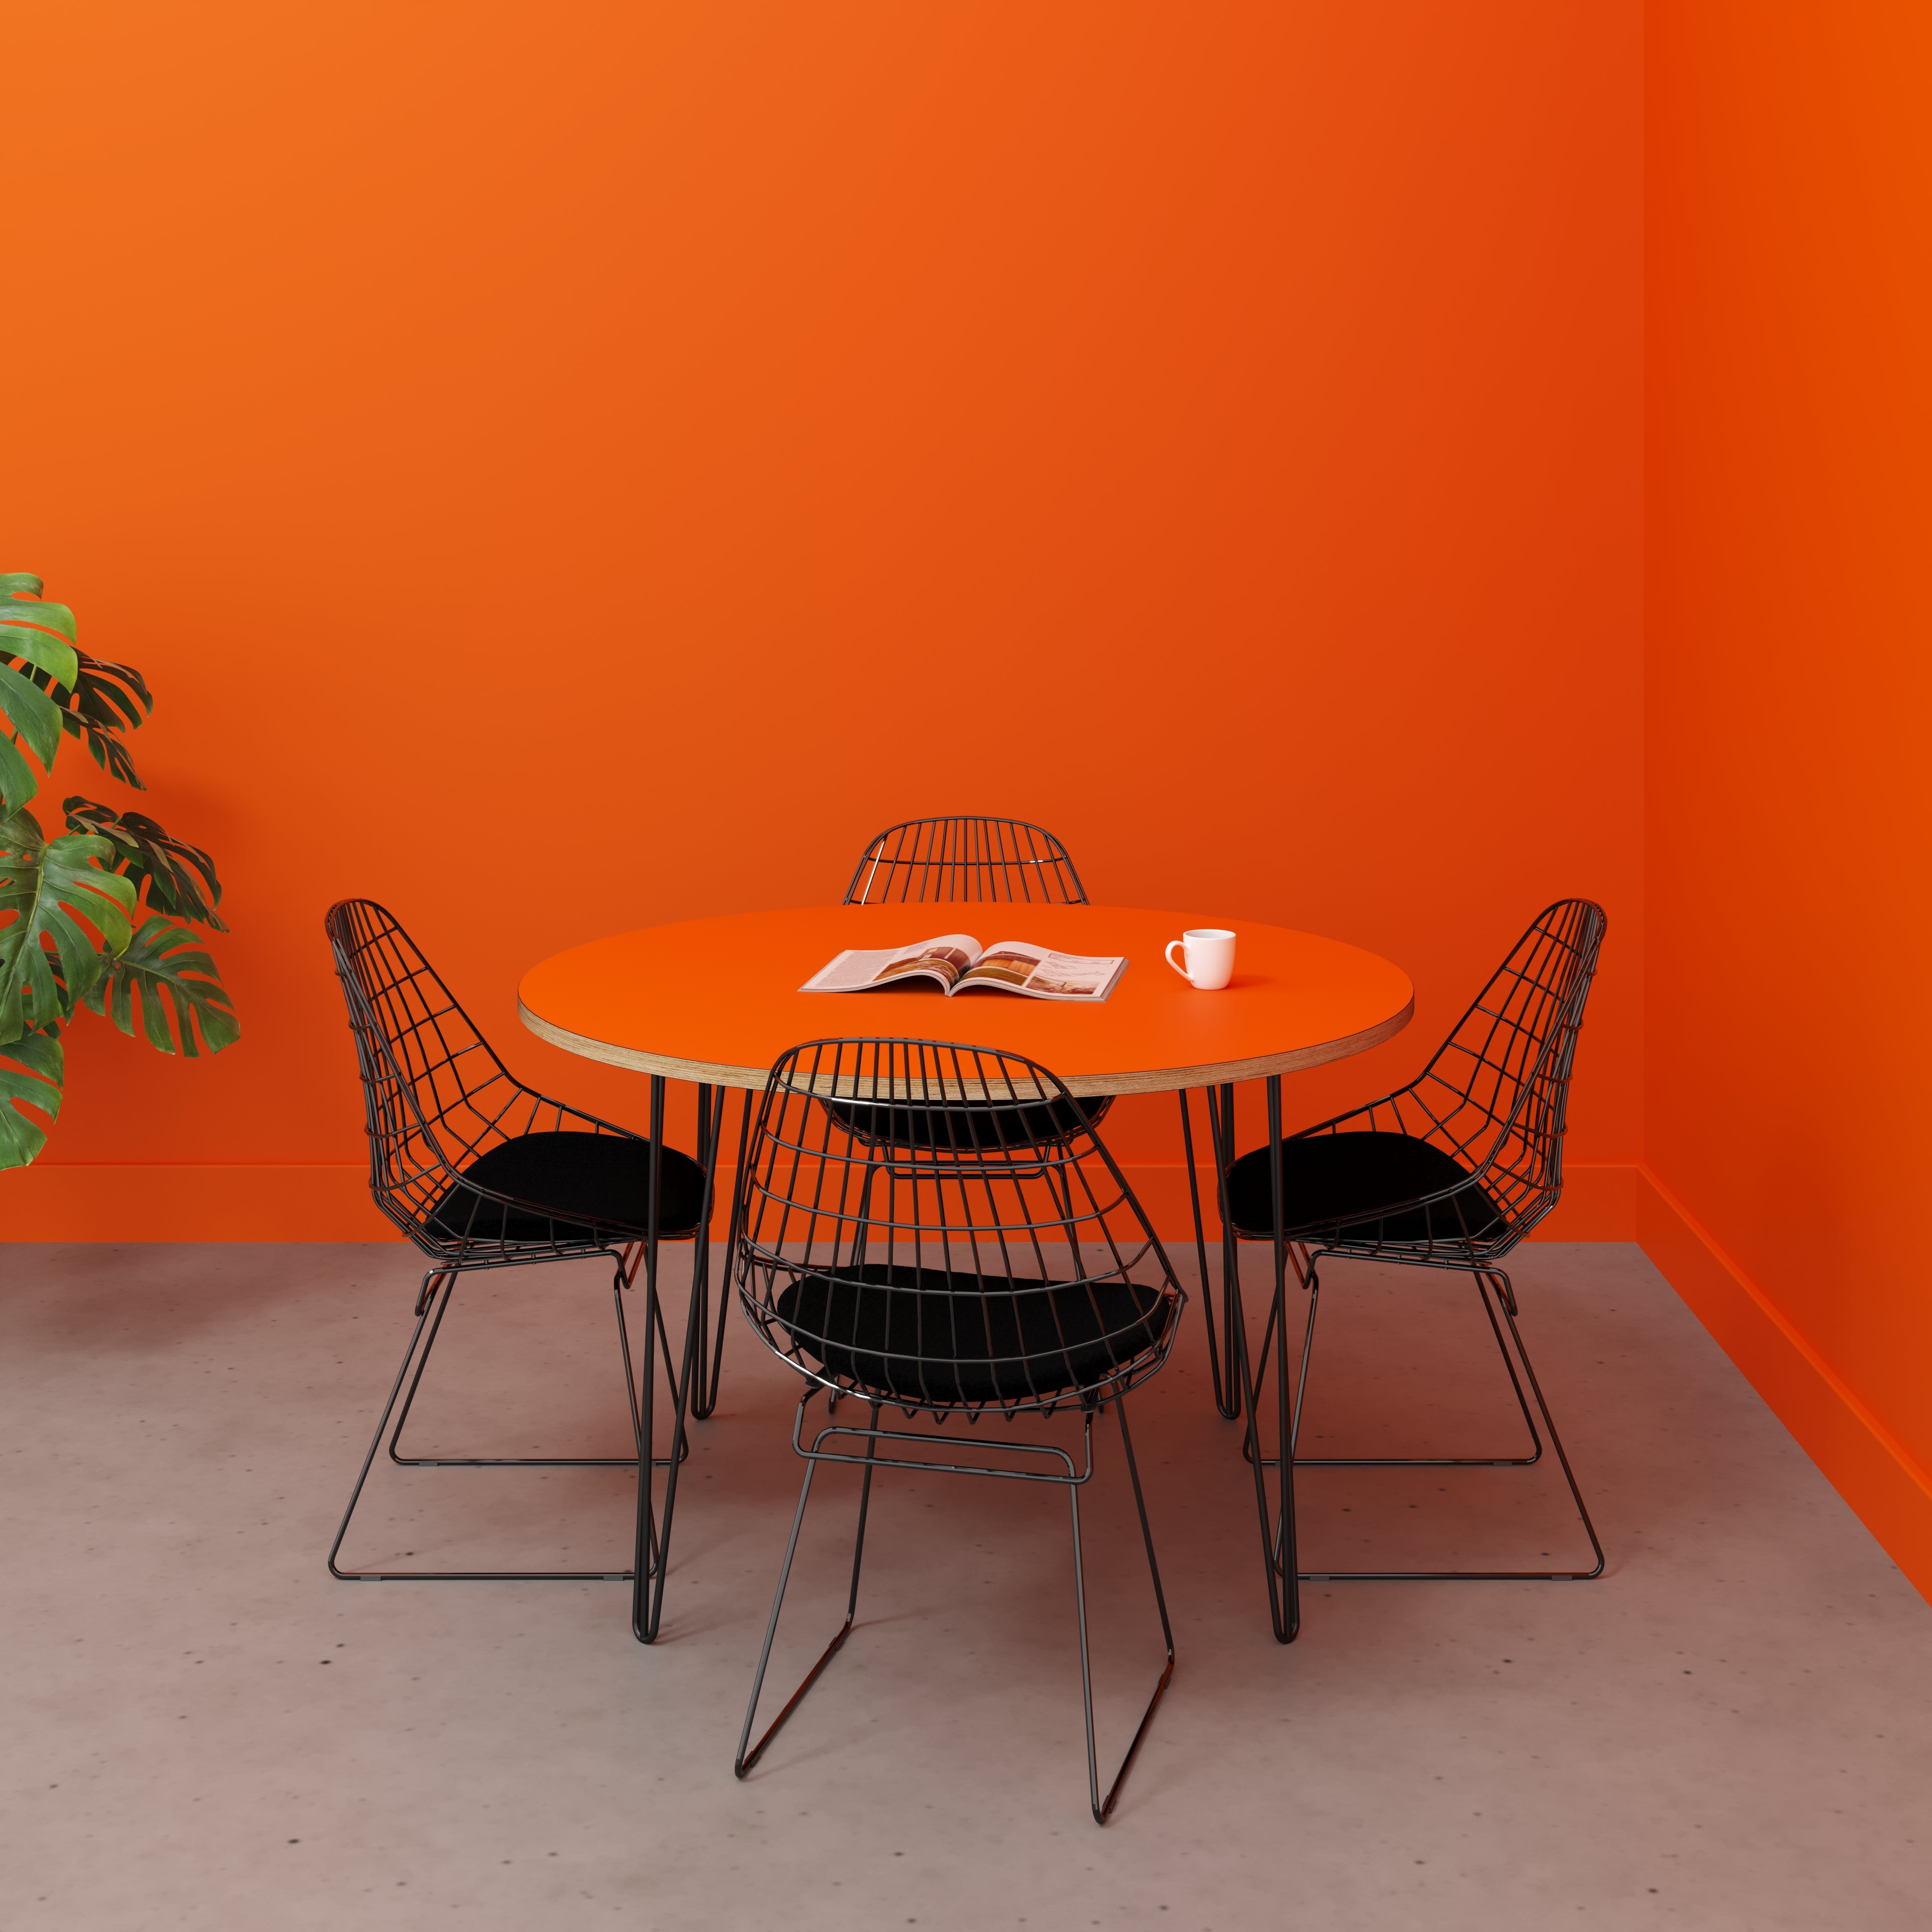 Round Table with Black Hairpin Legs - Formica Levante Orange - 1200(dia) x 735(h)